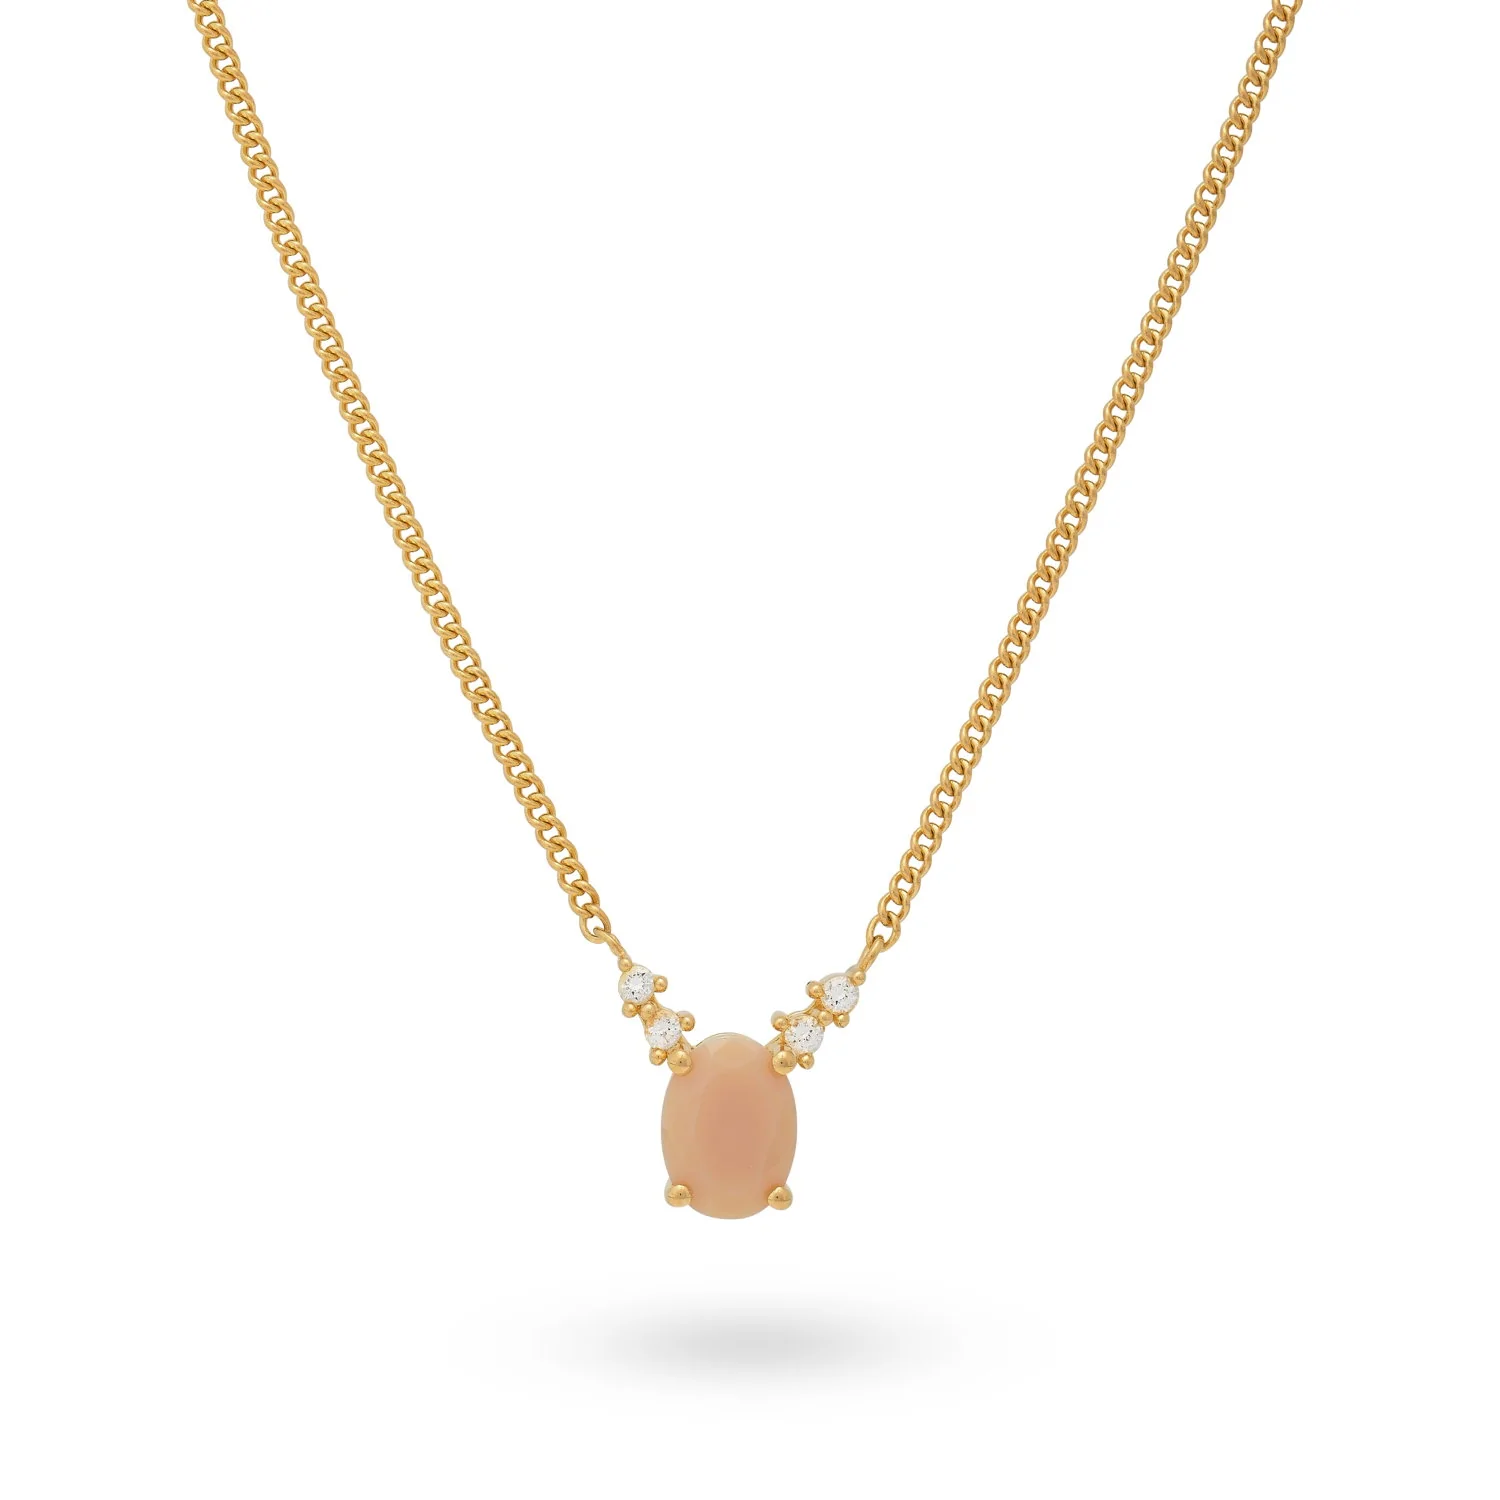 24Kae Gold Necklace with Oval Stone